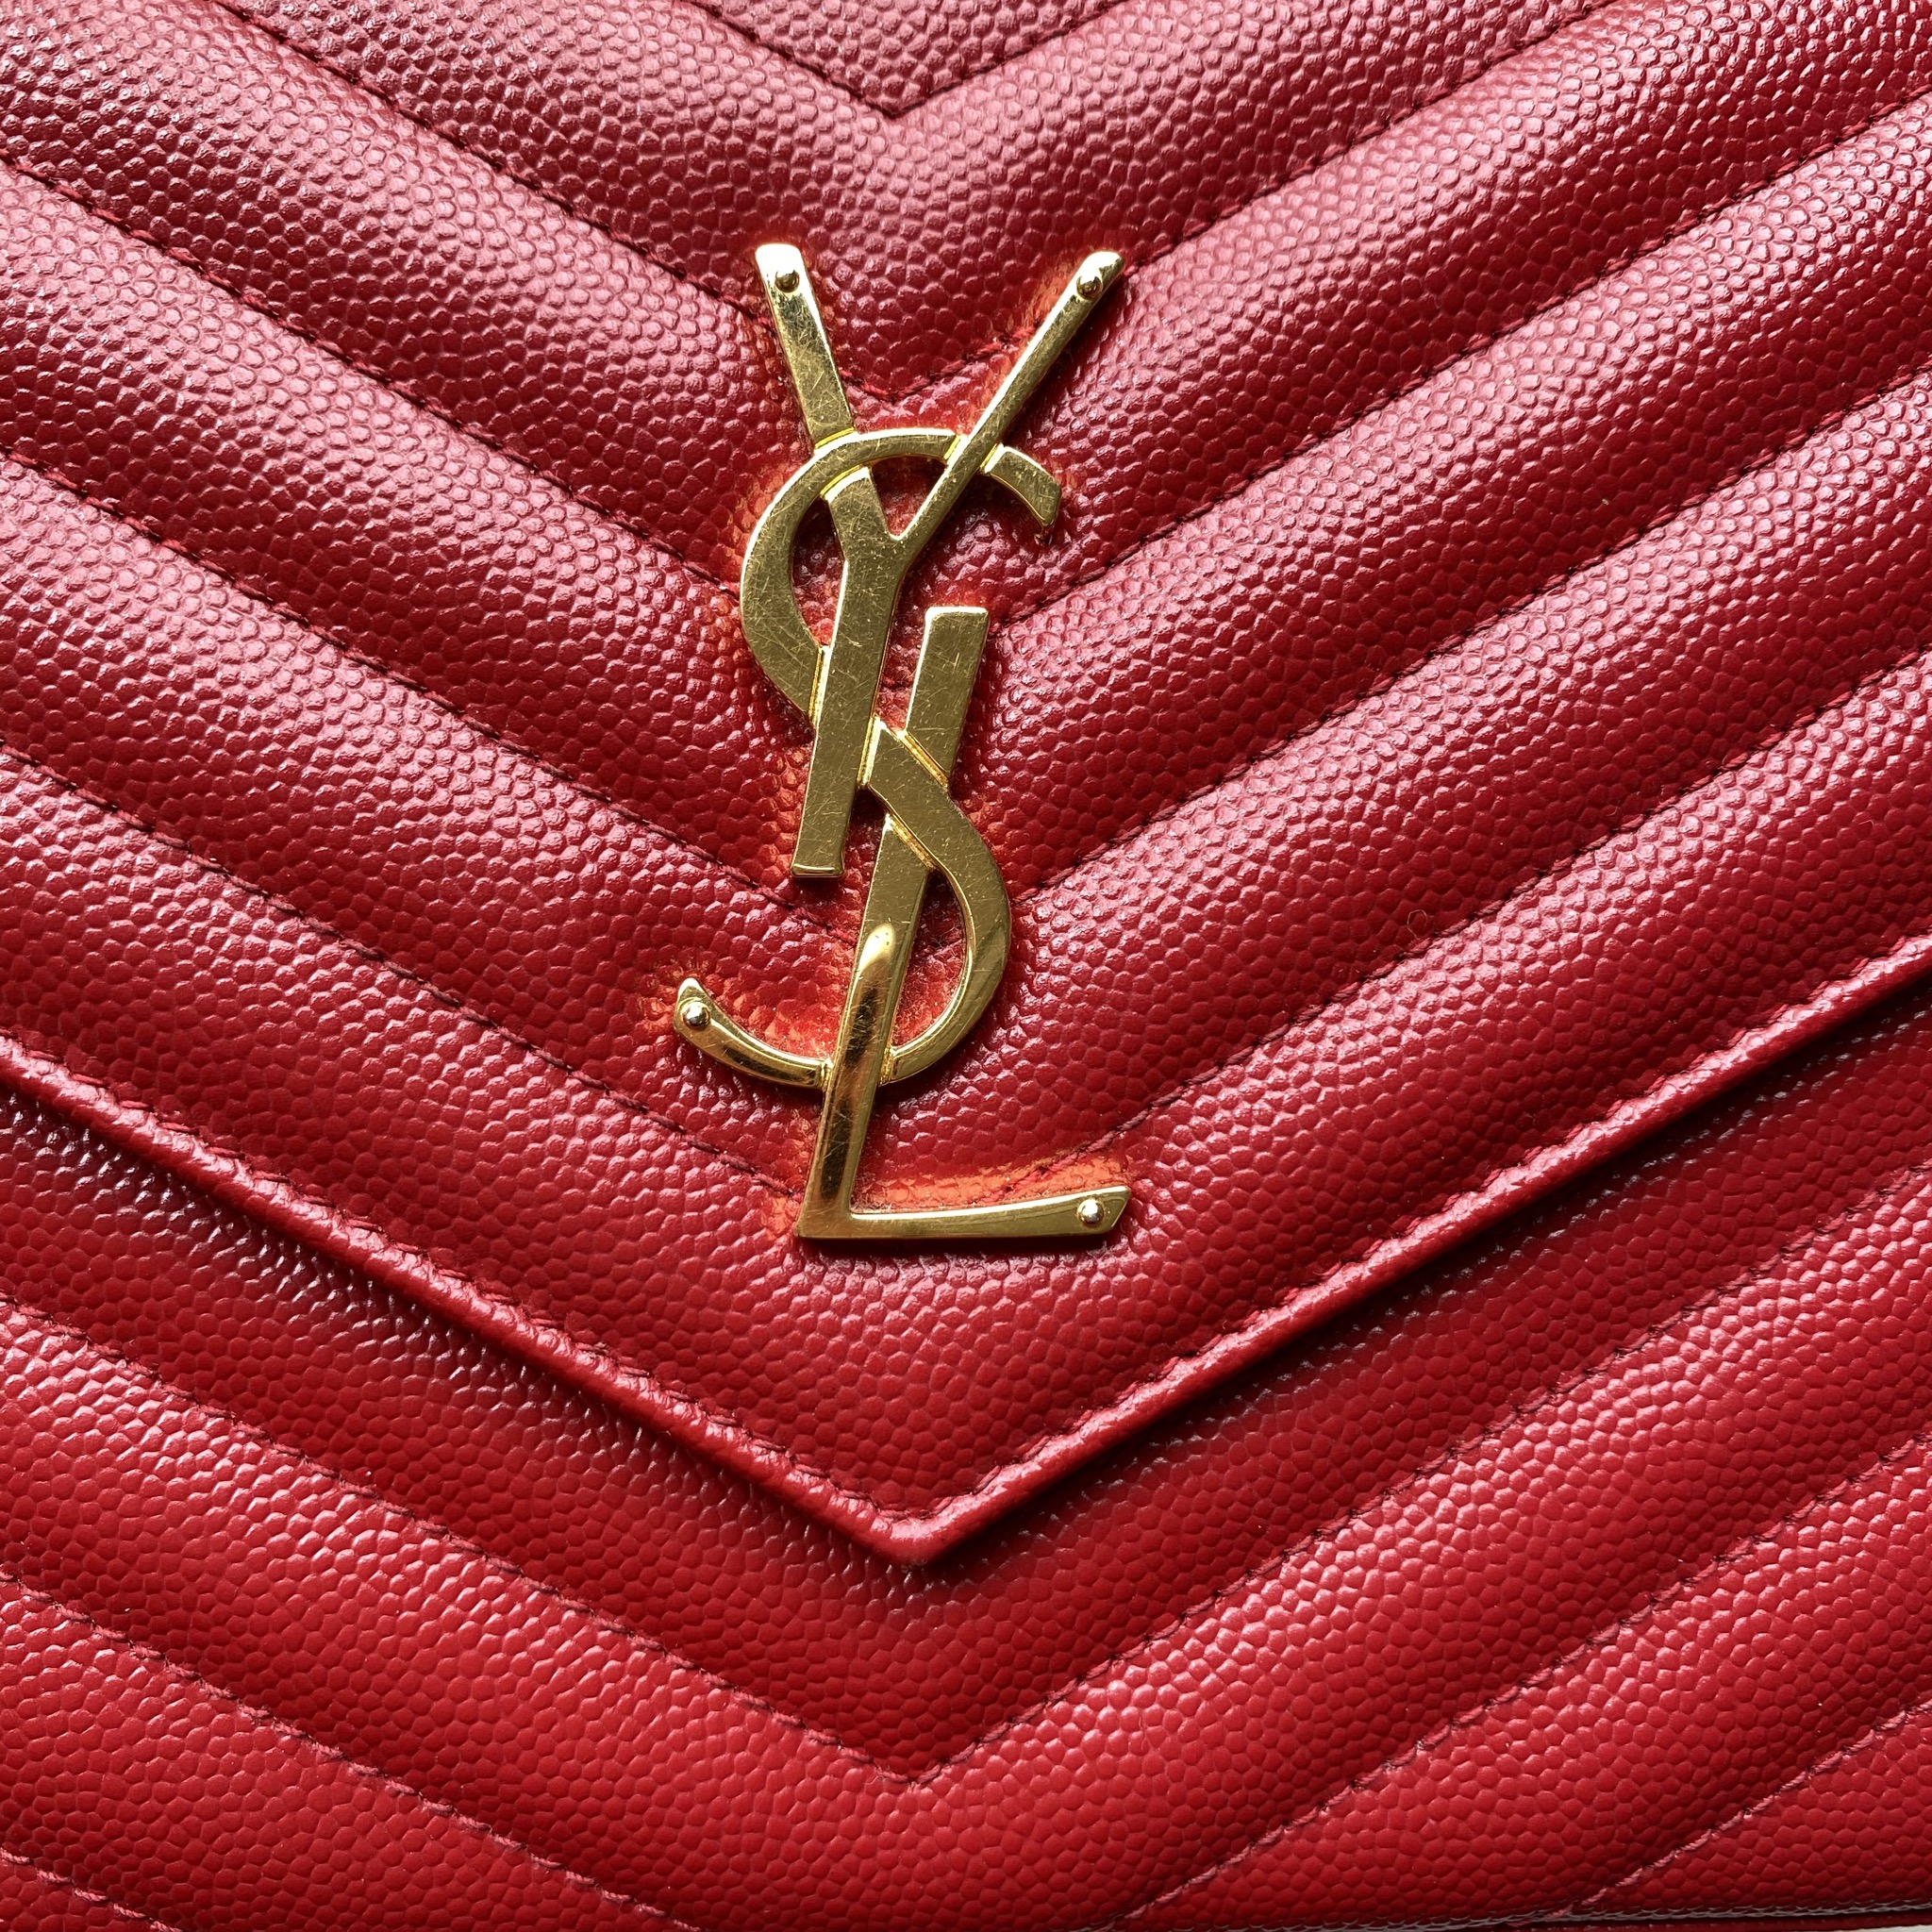 SPOT A AUTHENTIC YSL 